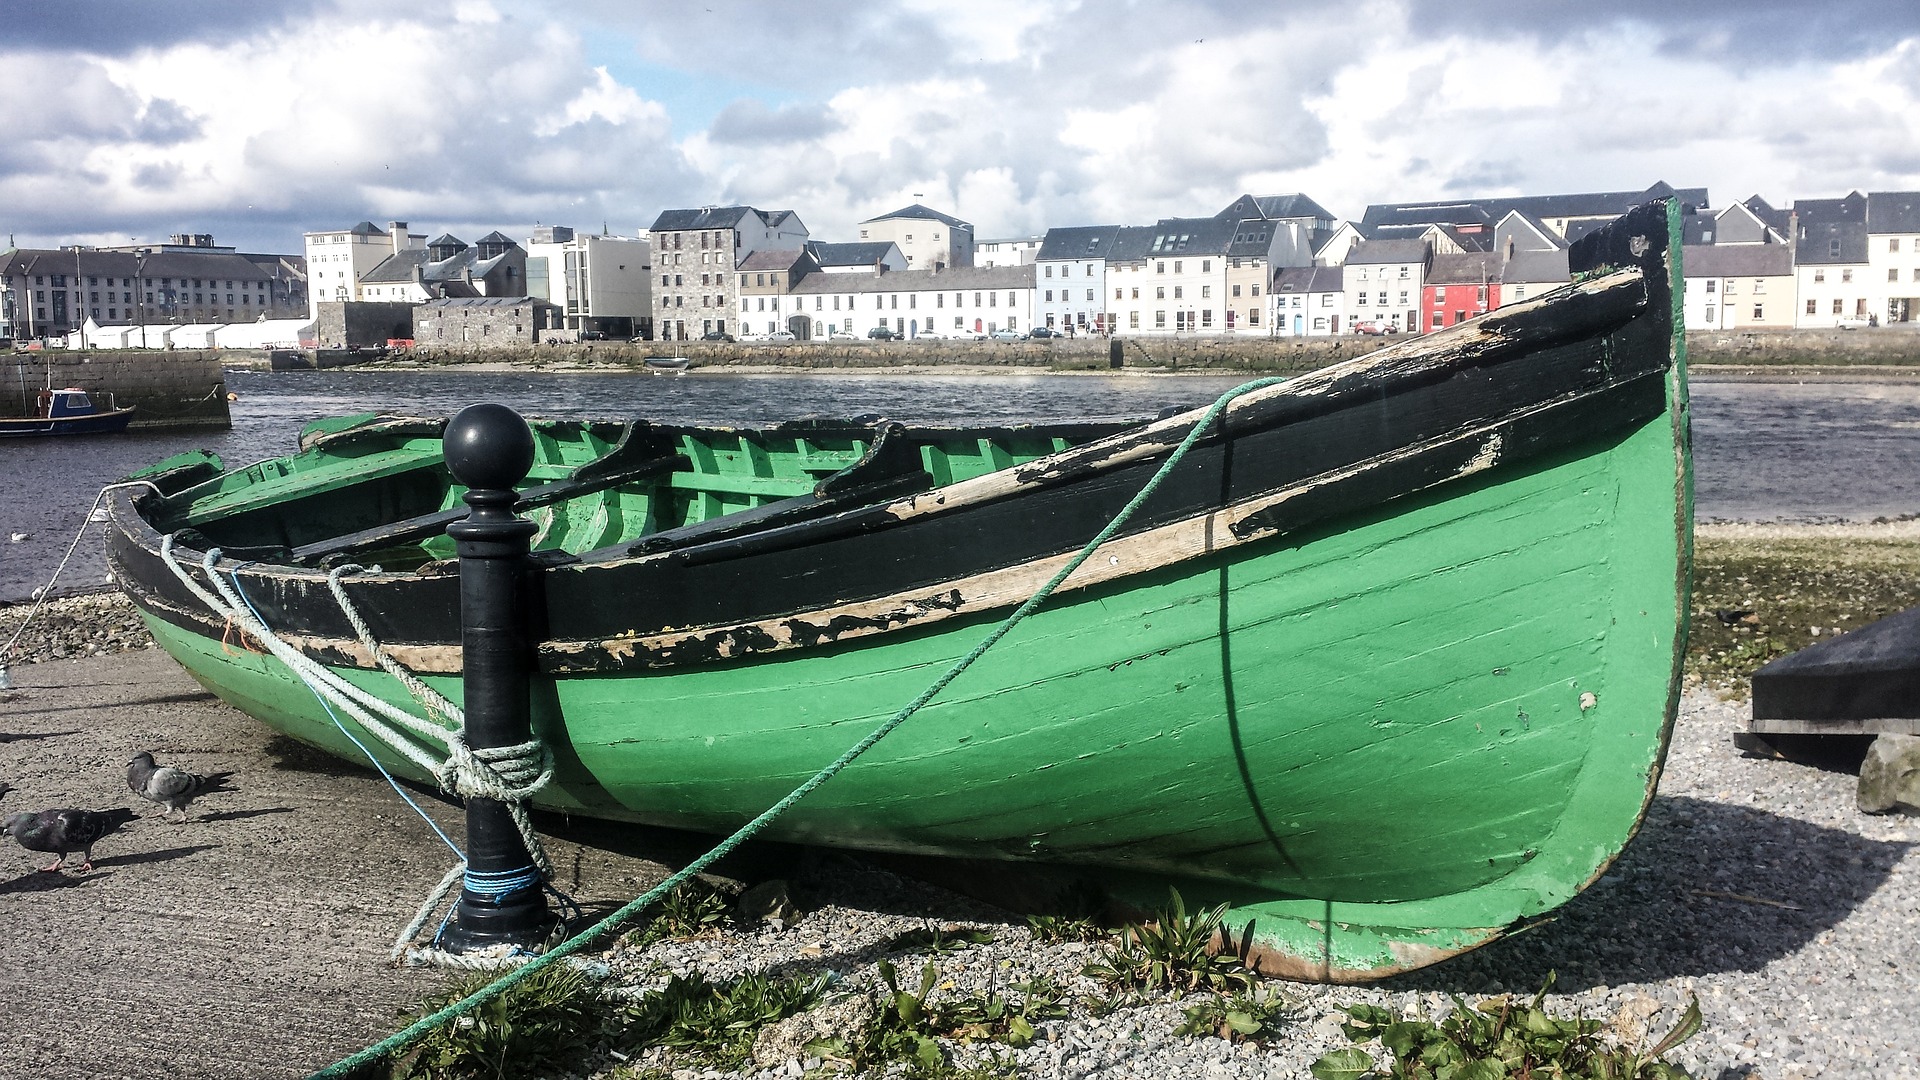 The Best Way to Explore Galway City – By Foot